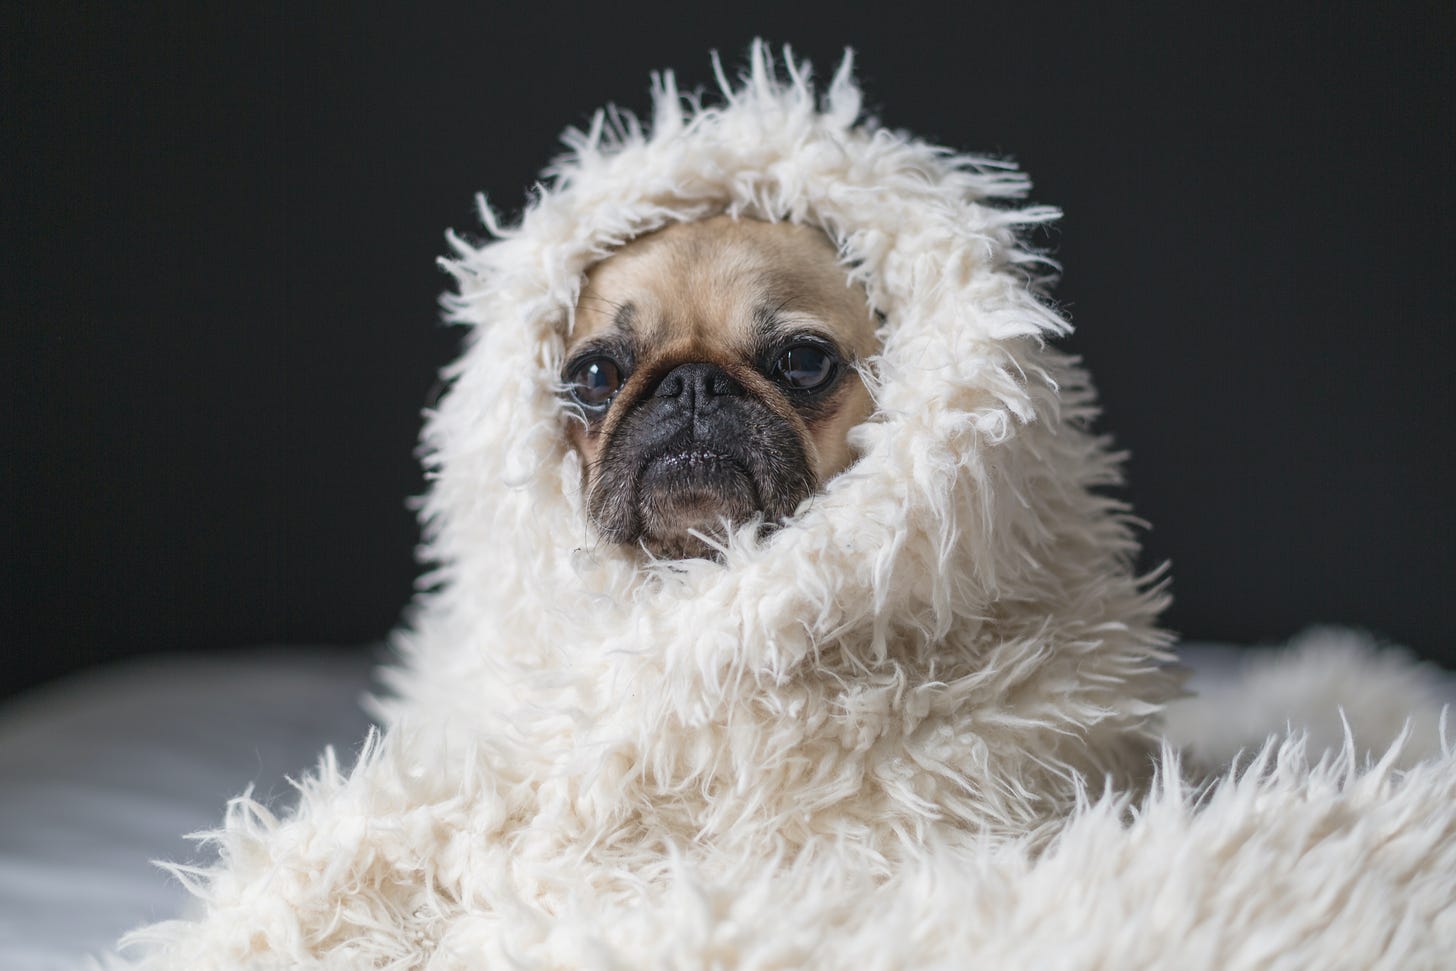 A sad-looking pug wrapped in a fuzzy white blanket against a black background. 